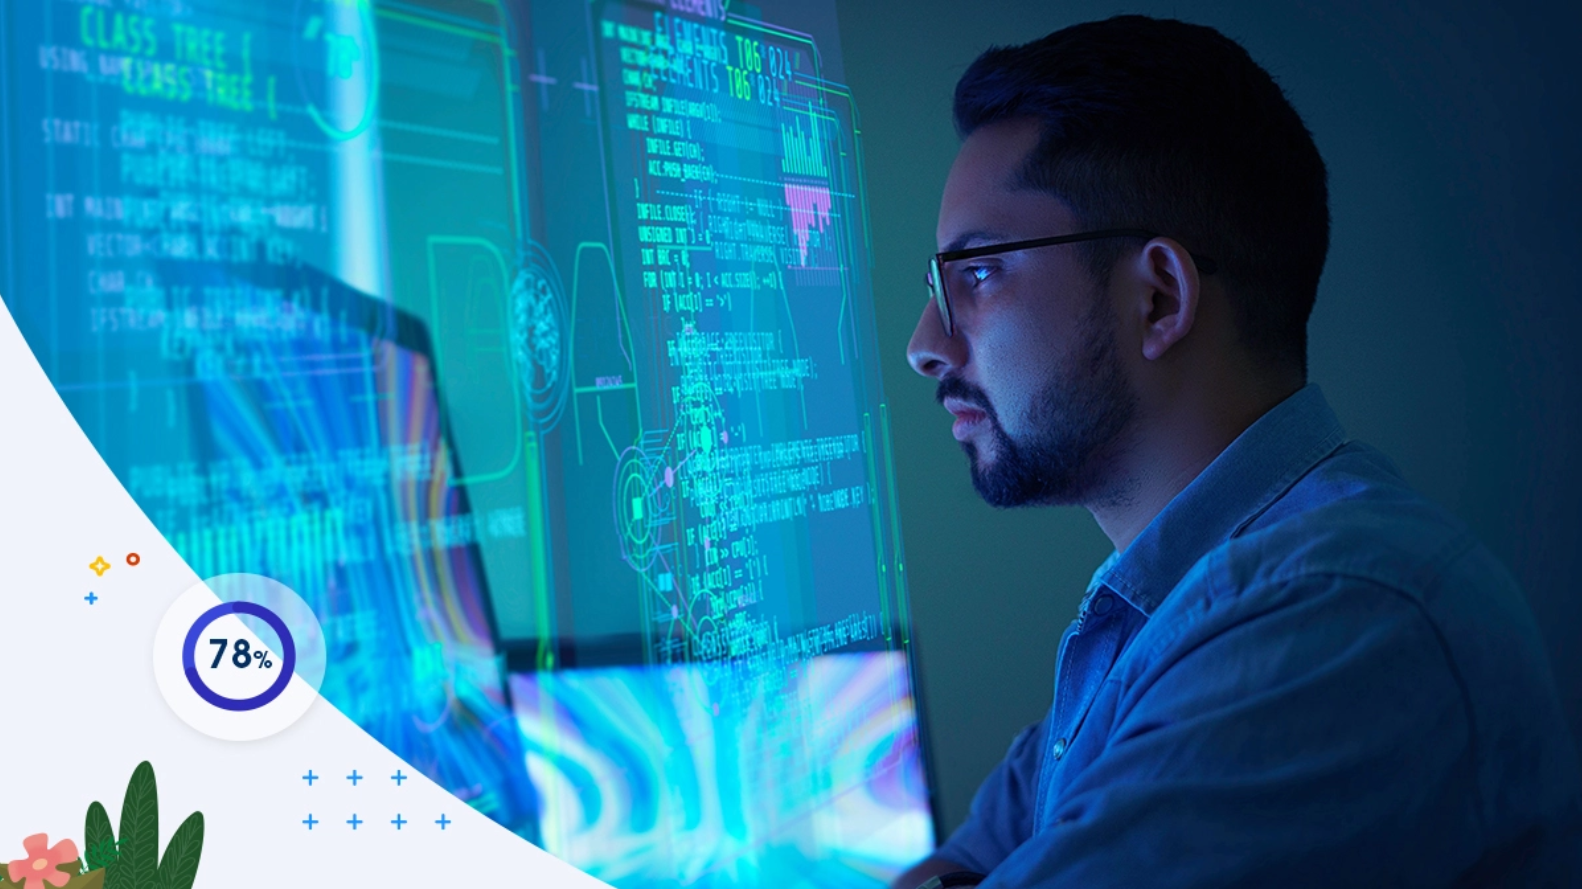 Man looking at code on a big screen in blue light